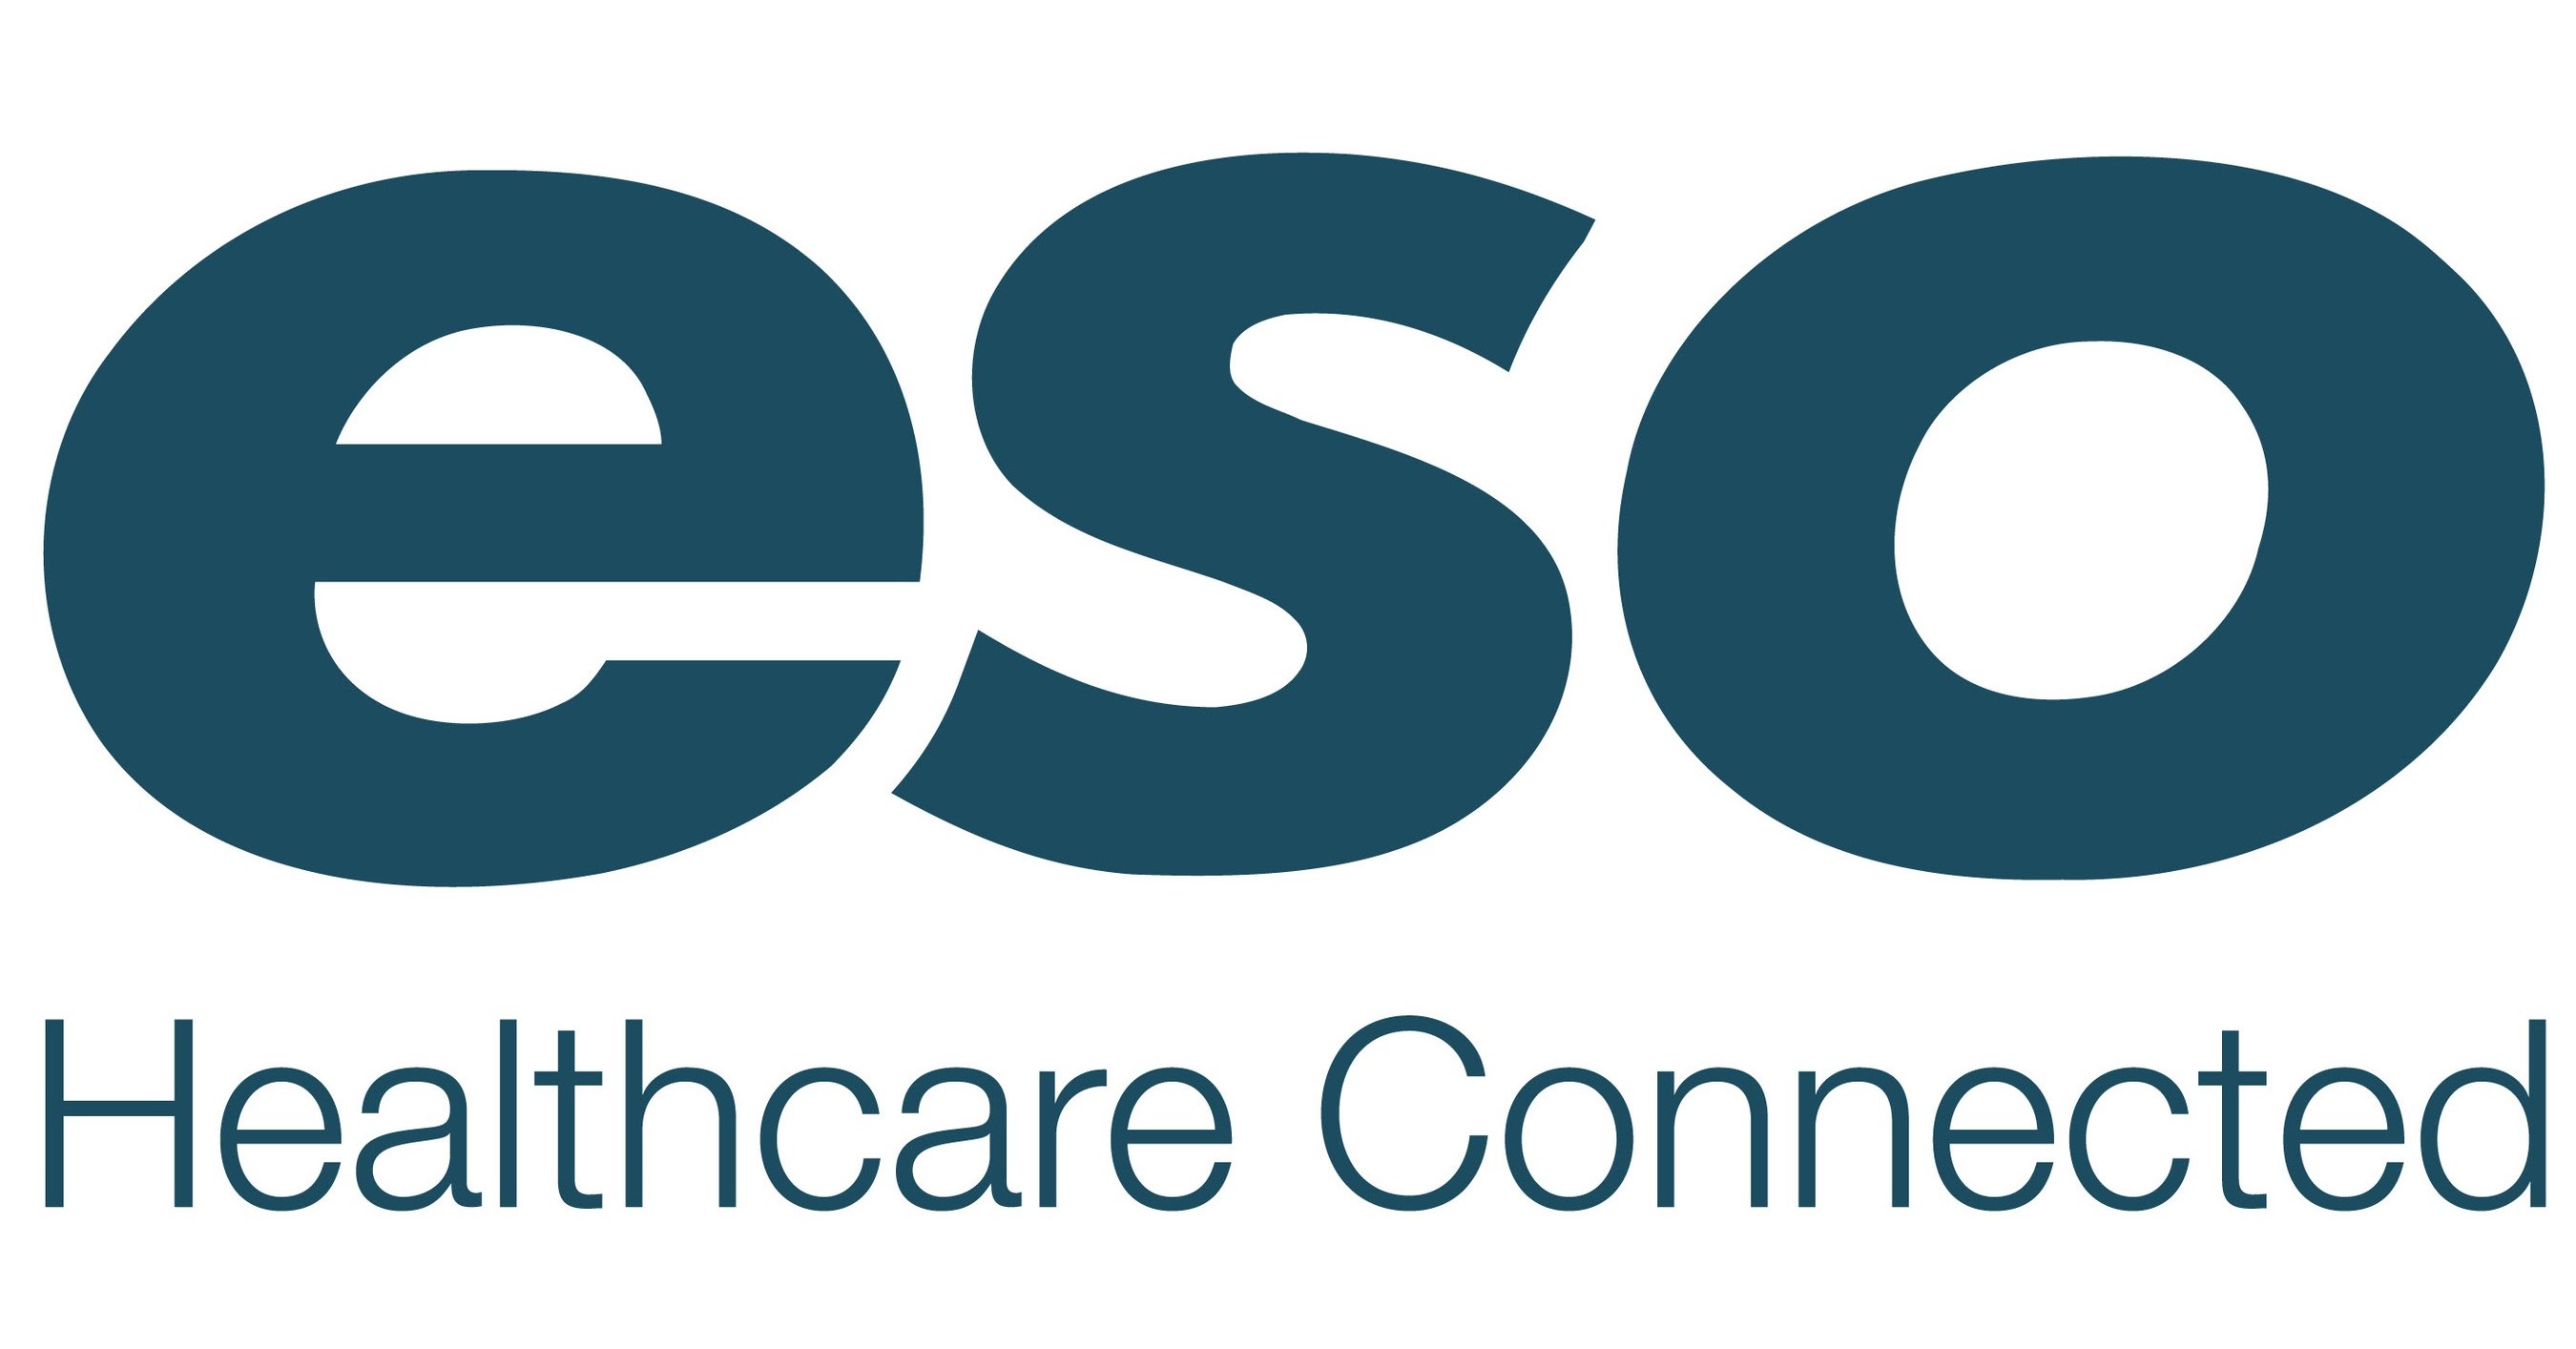 Electronic Health Record Software (EHR) for Fire - ESO